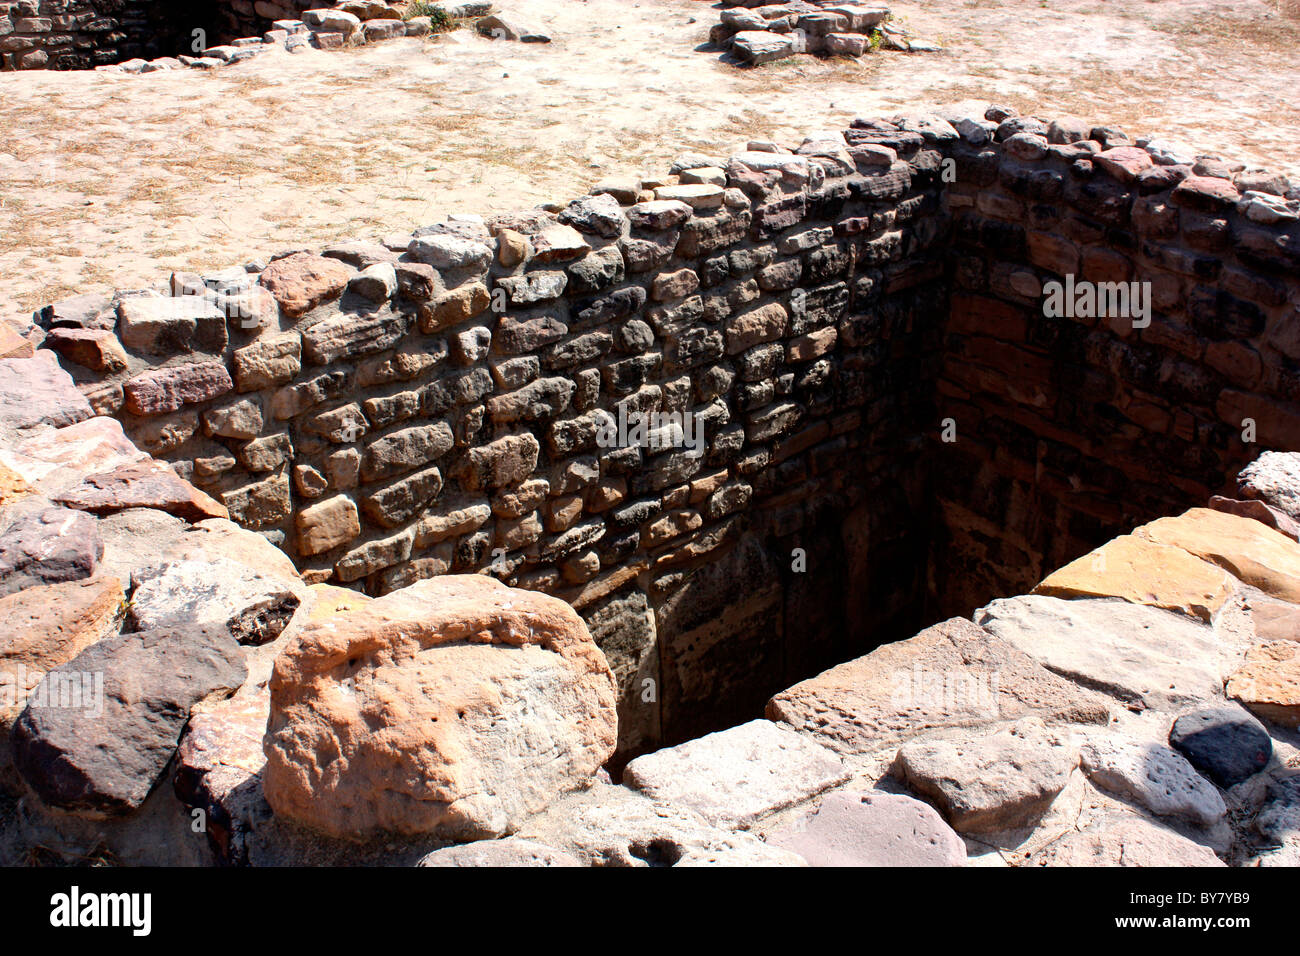 A brick water tank at the Excavated ruins of Harrappa civilisation at Dholavira, anicient site of Indus valley civilisation, Stock Photo